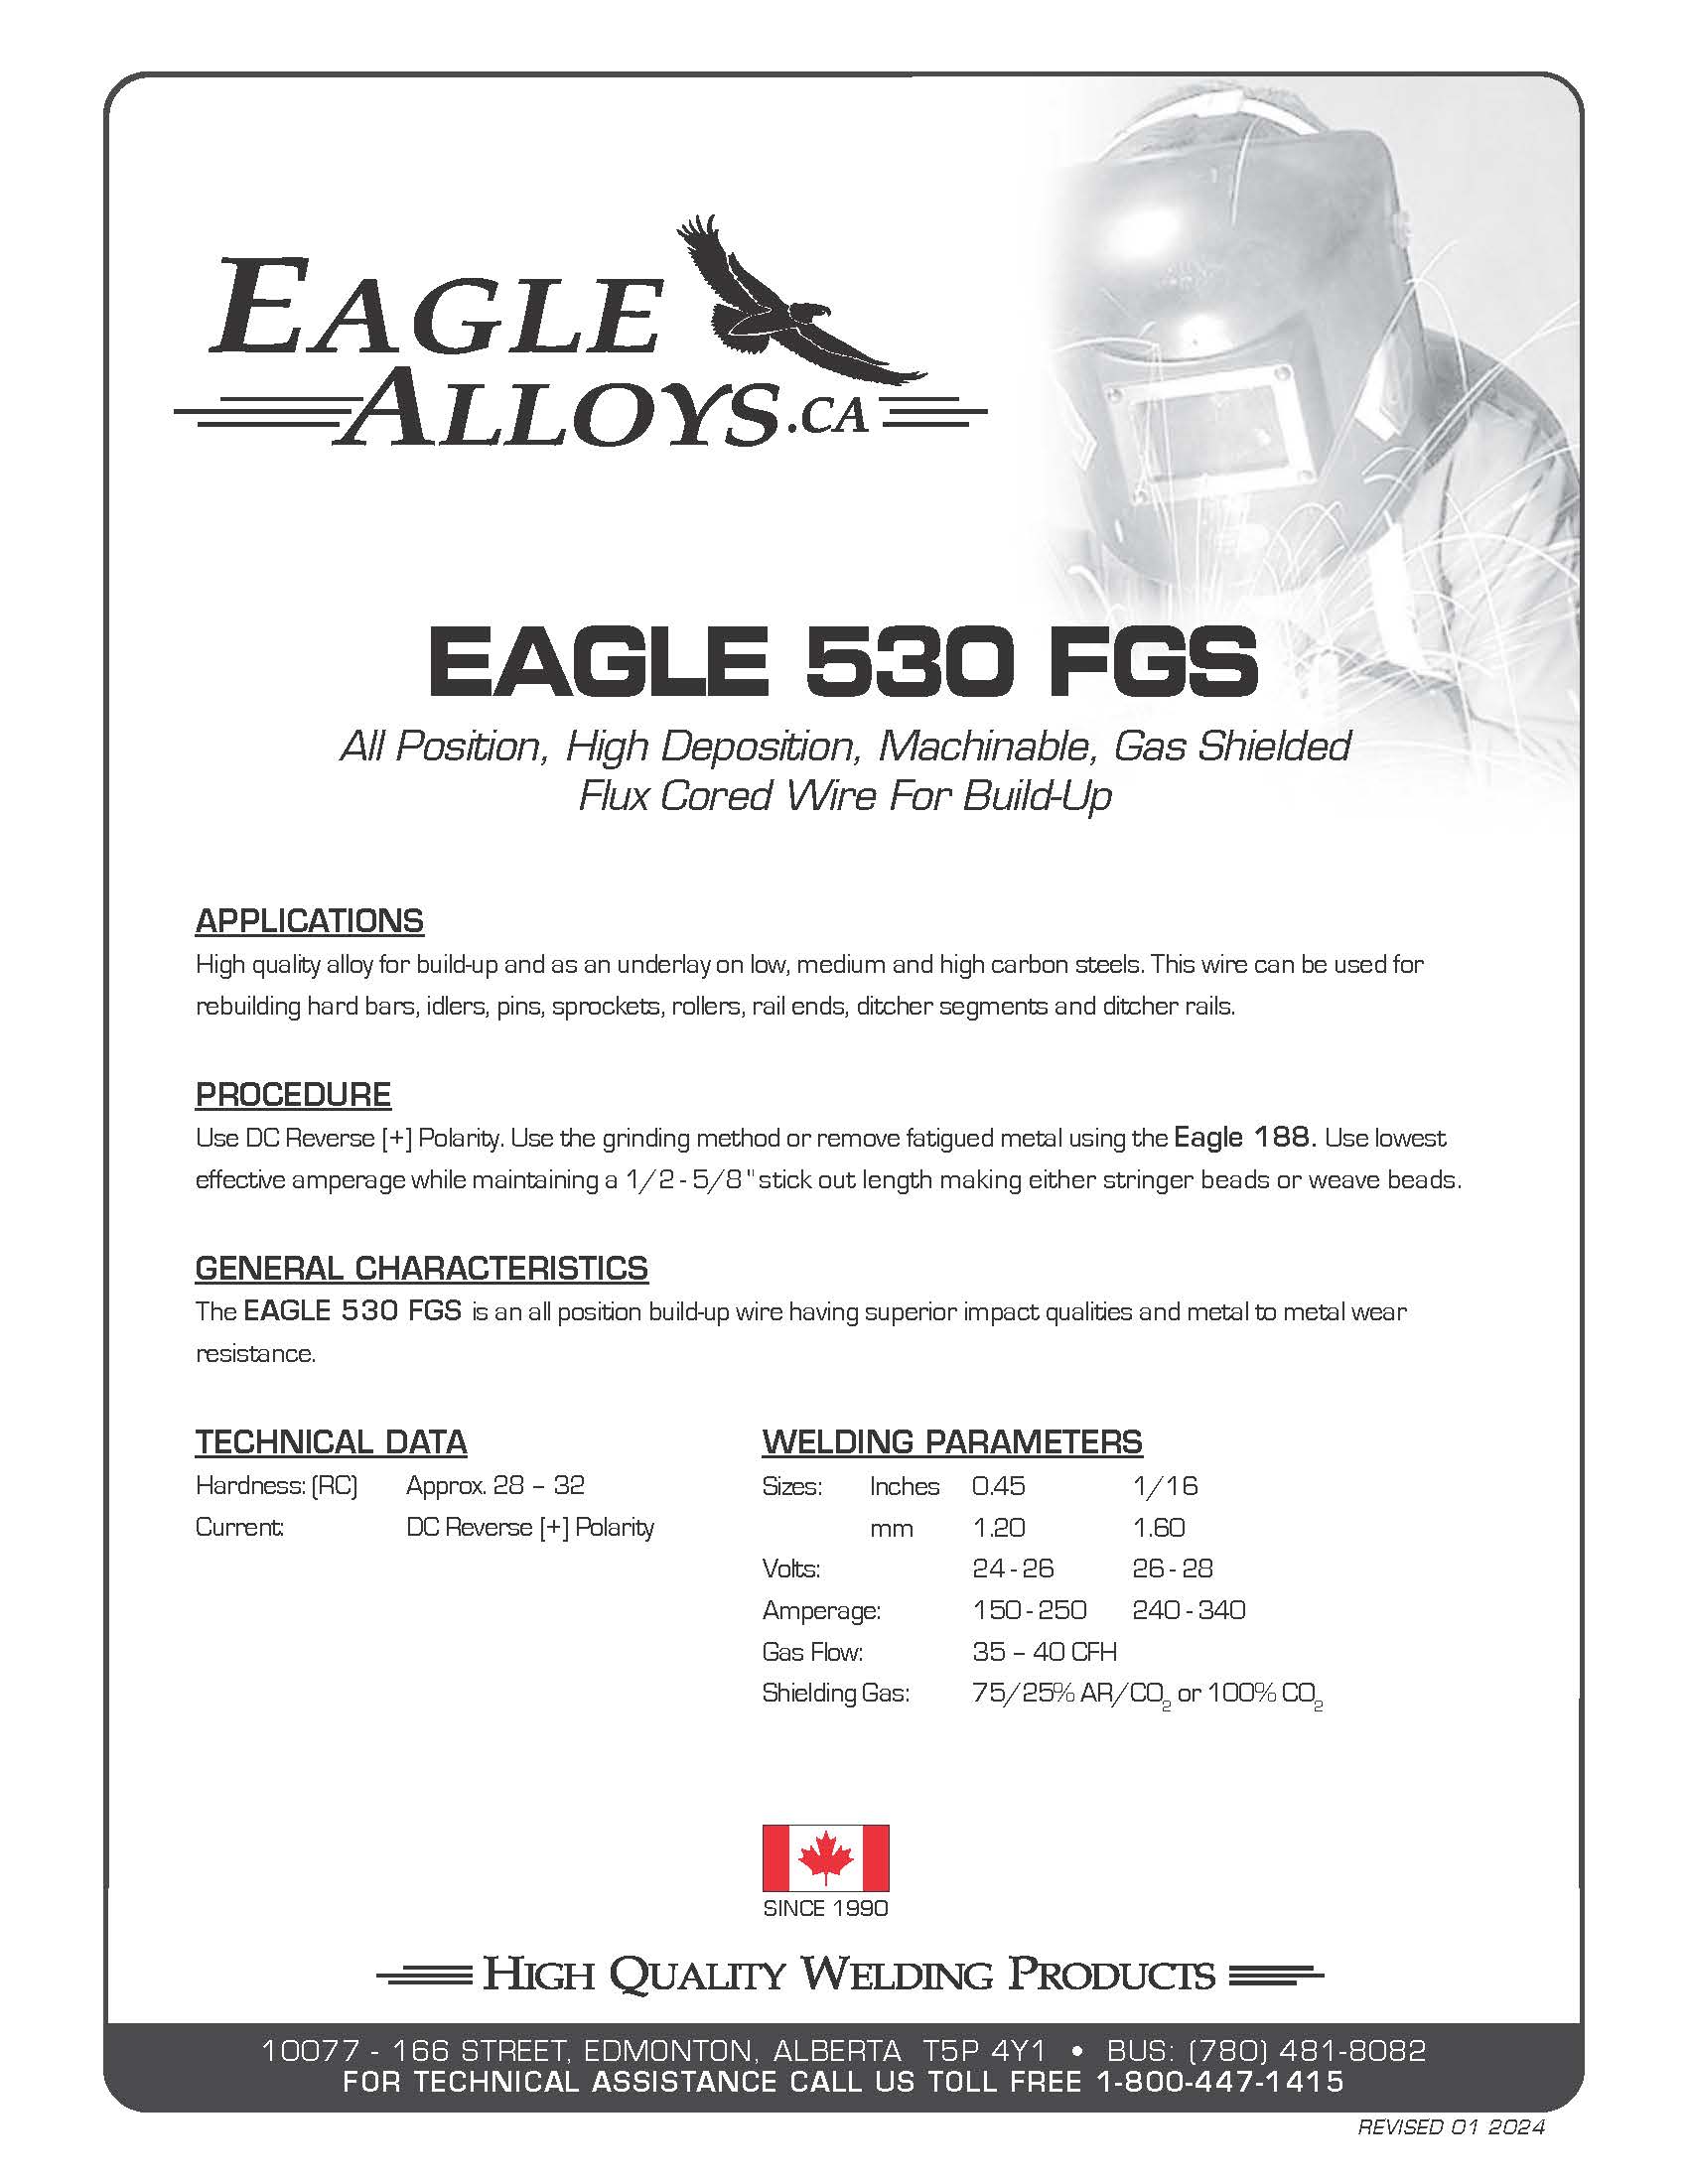 EAGLE 530 FGS | All Positions, High Deposition, Machinable Gas Shielded Flux Cored Wire For Build-Up PDF